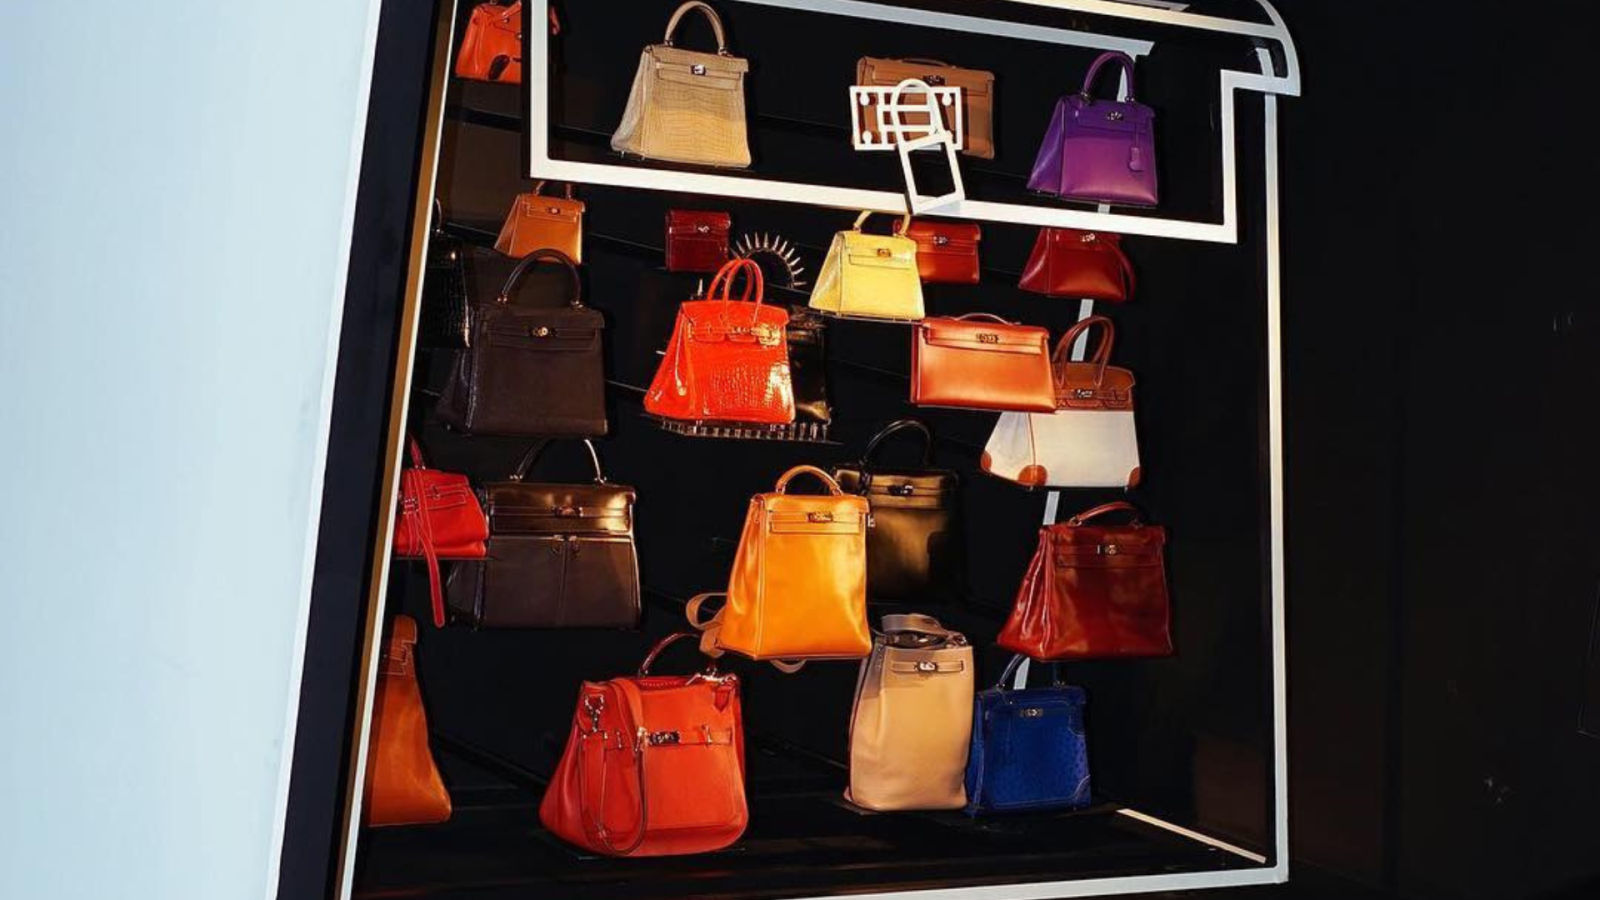 10 best Hermes Kelly bag alternatives for every quiet luxury budget